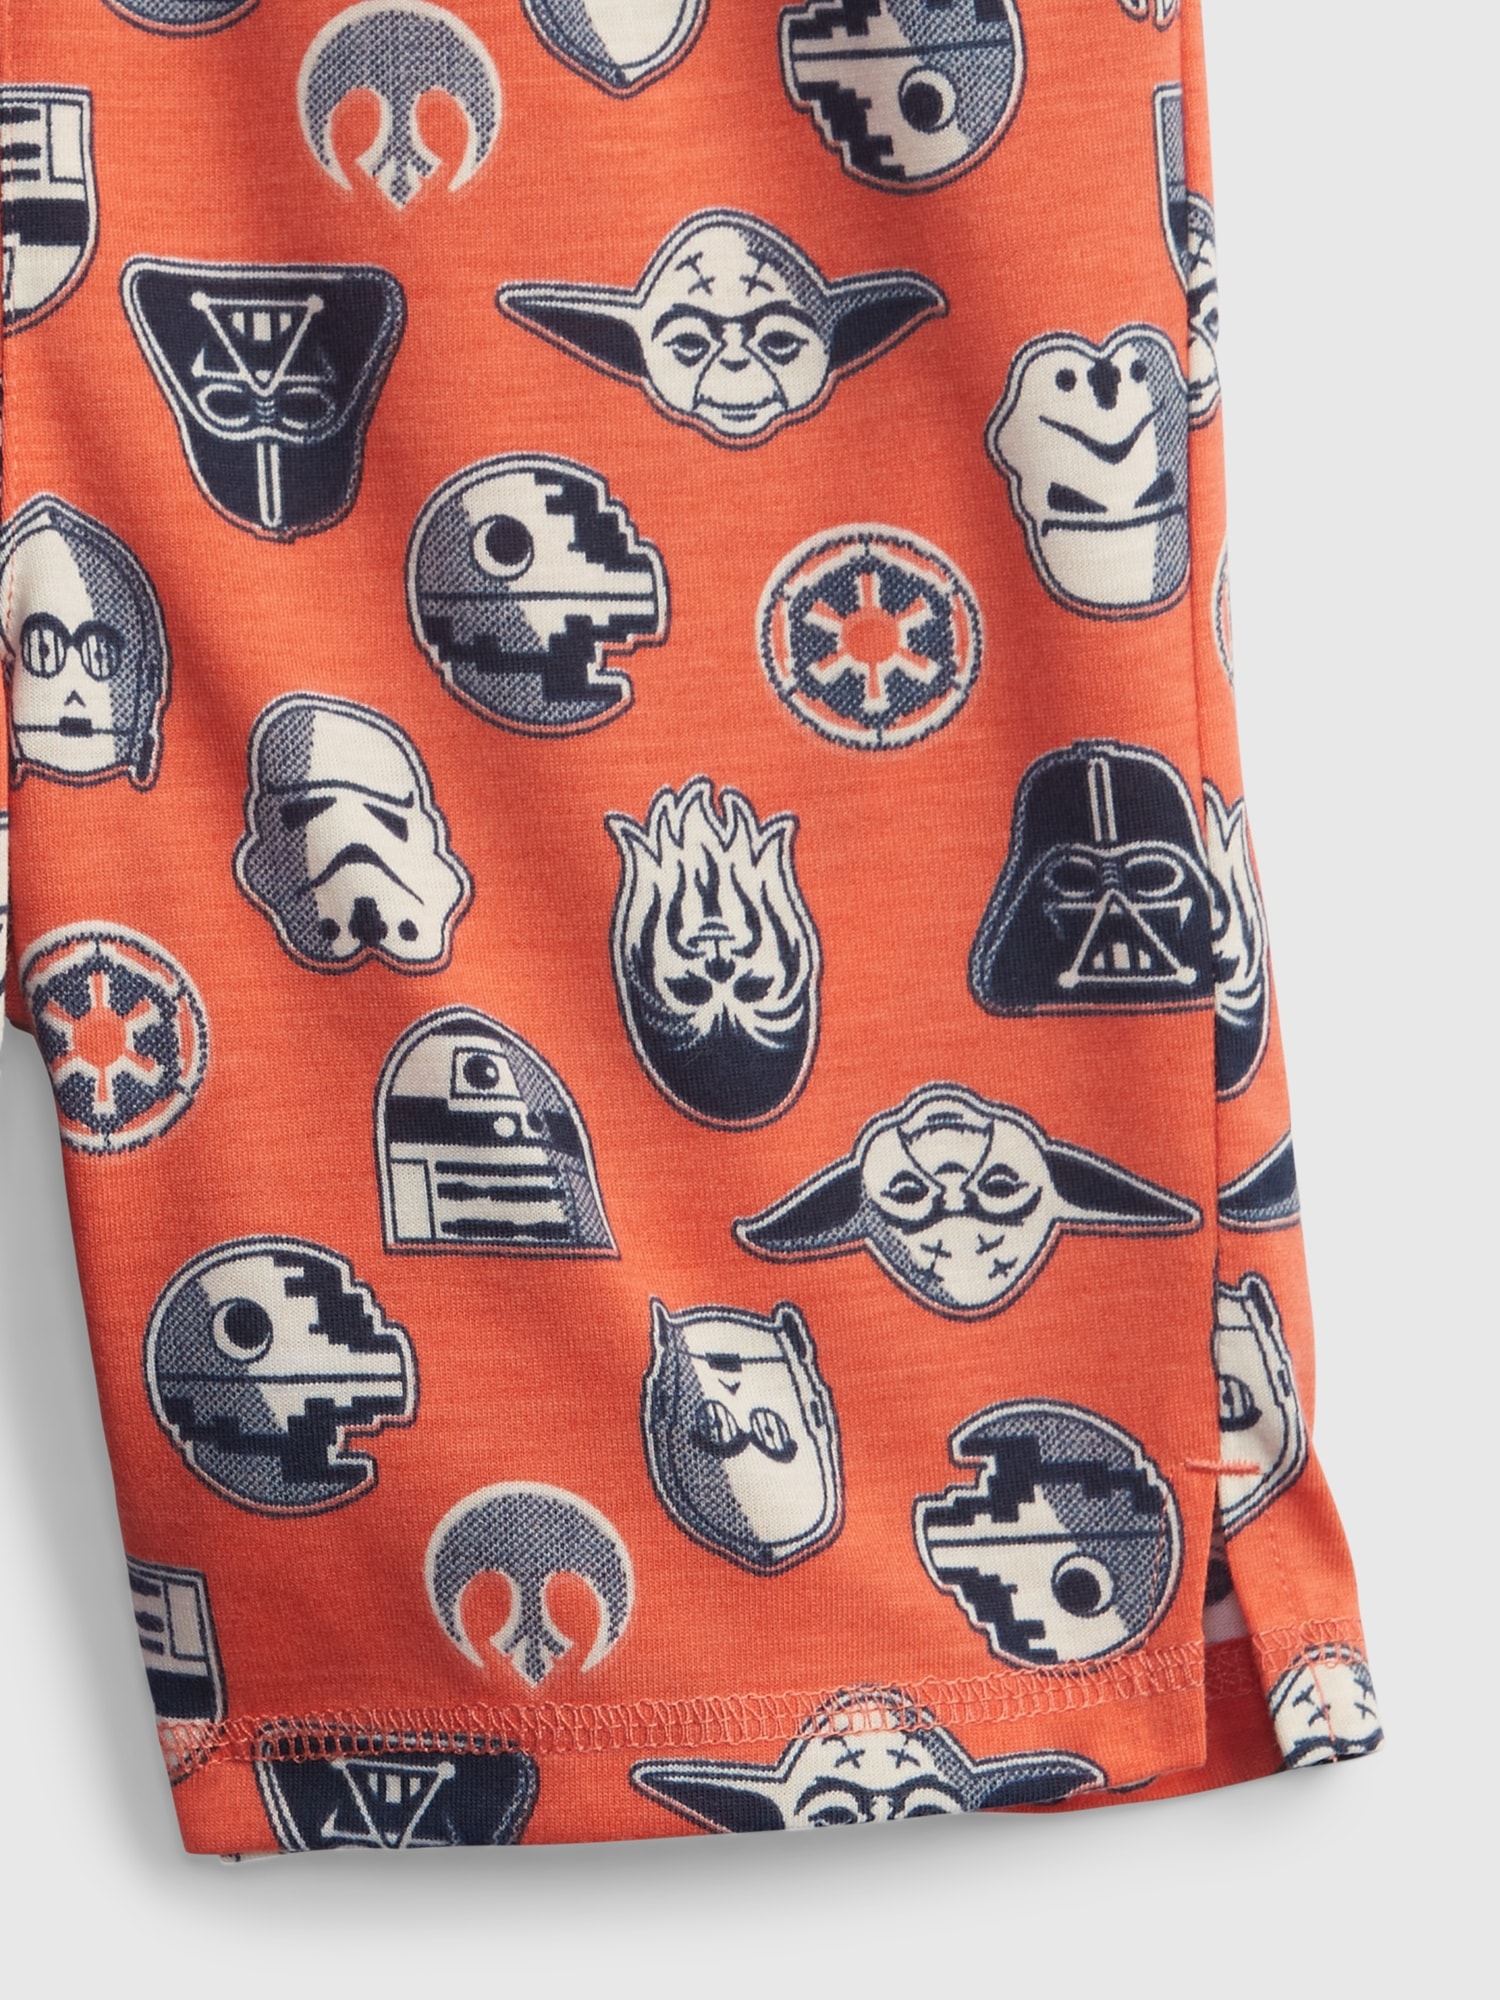 GapKids | Star Wars™ 100% Recycled Graphic Pull-On PJ Shorts | Gap